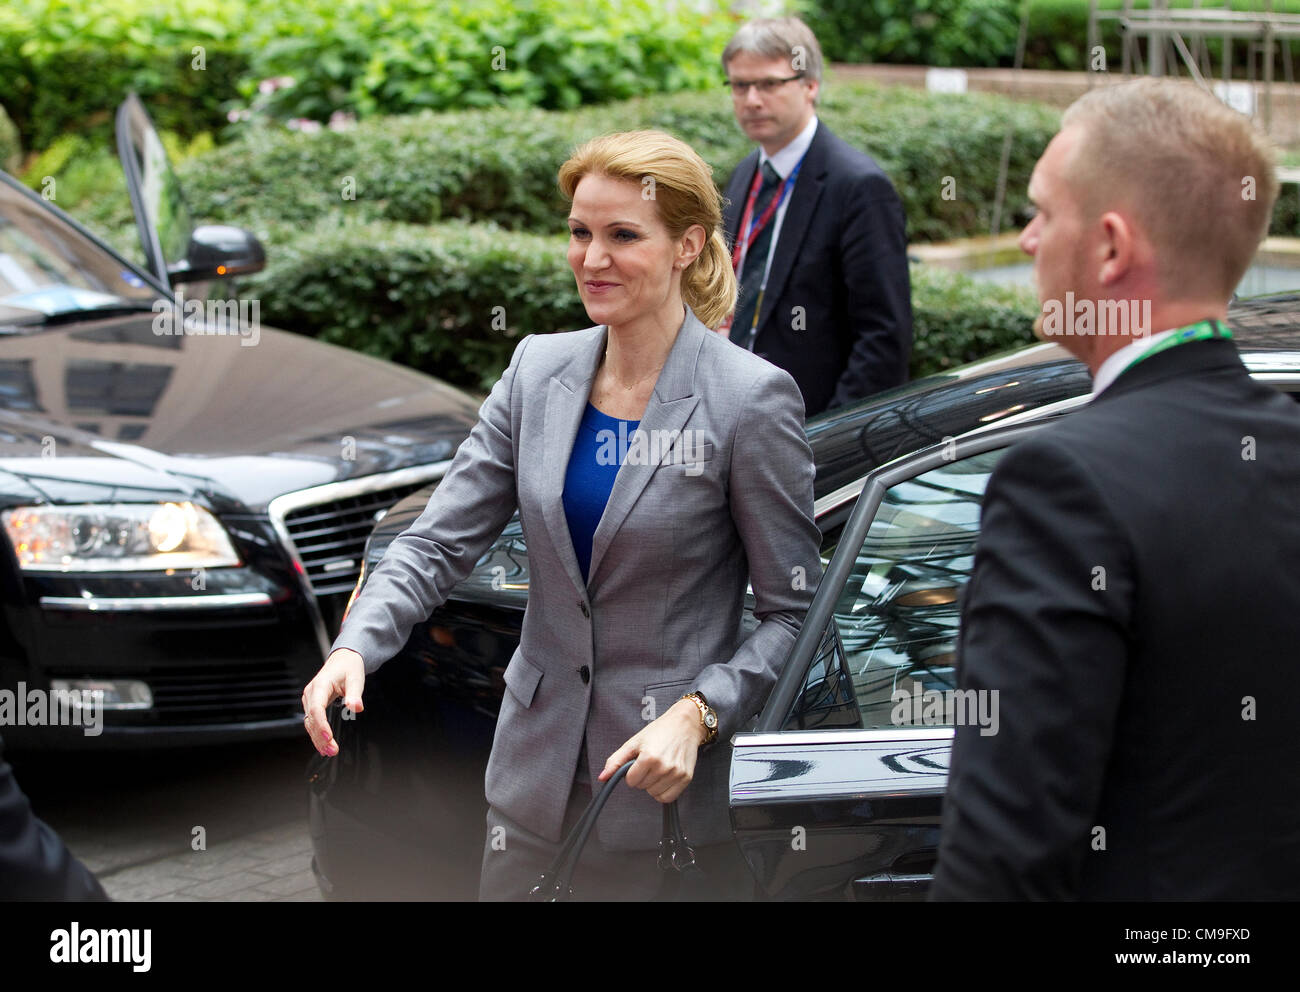 EU Summit, Justus Lipsus Building, Brussels Parliament, Belgium. 29.06.2012 Helle Thorning-Schmidt, Danish Prime Minister, arrives at the European Union Summit 2nd Day in Brussels, Belgium. Stock Photo